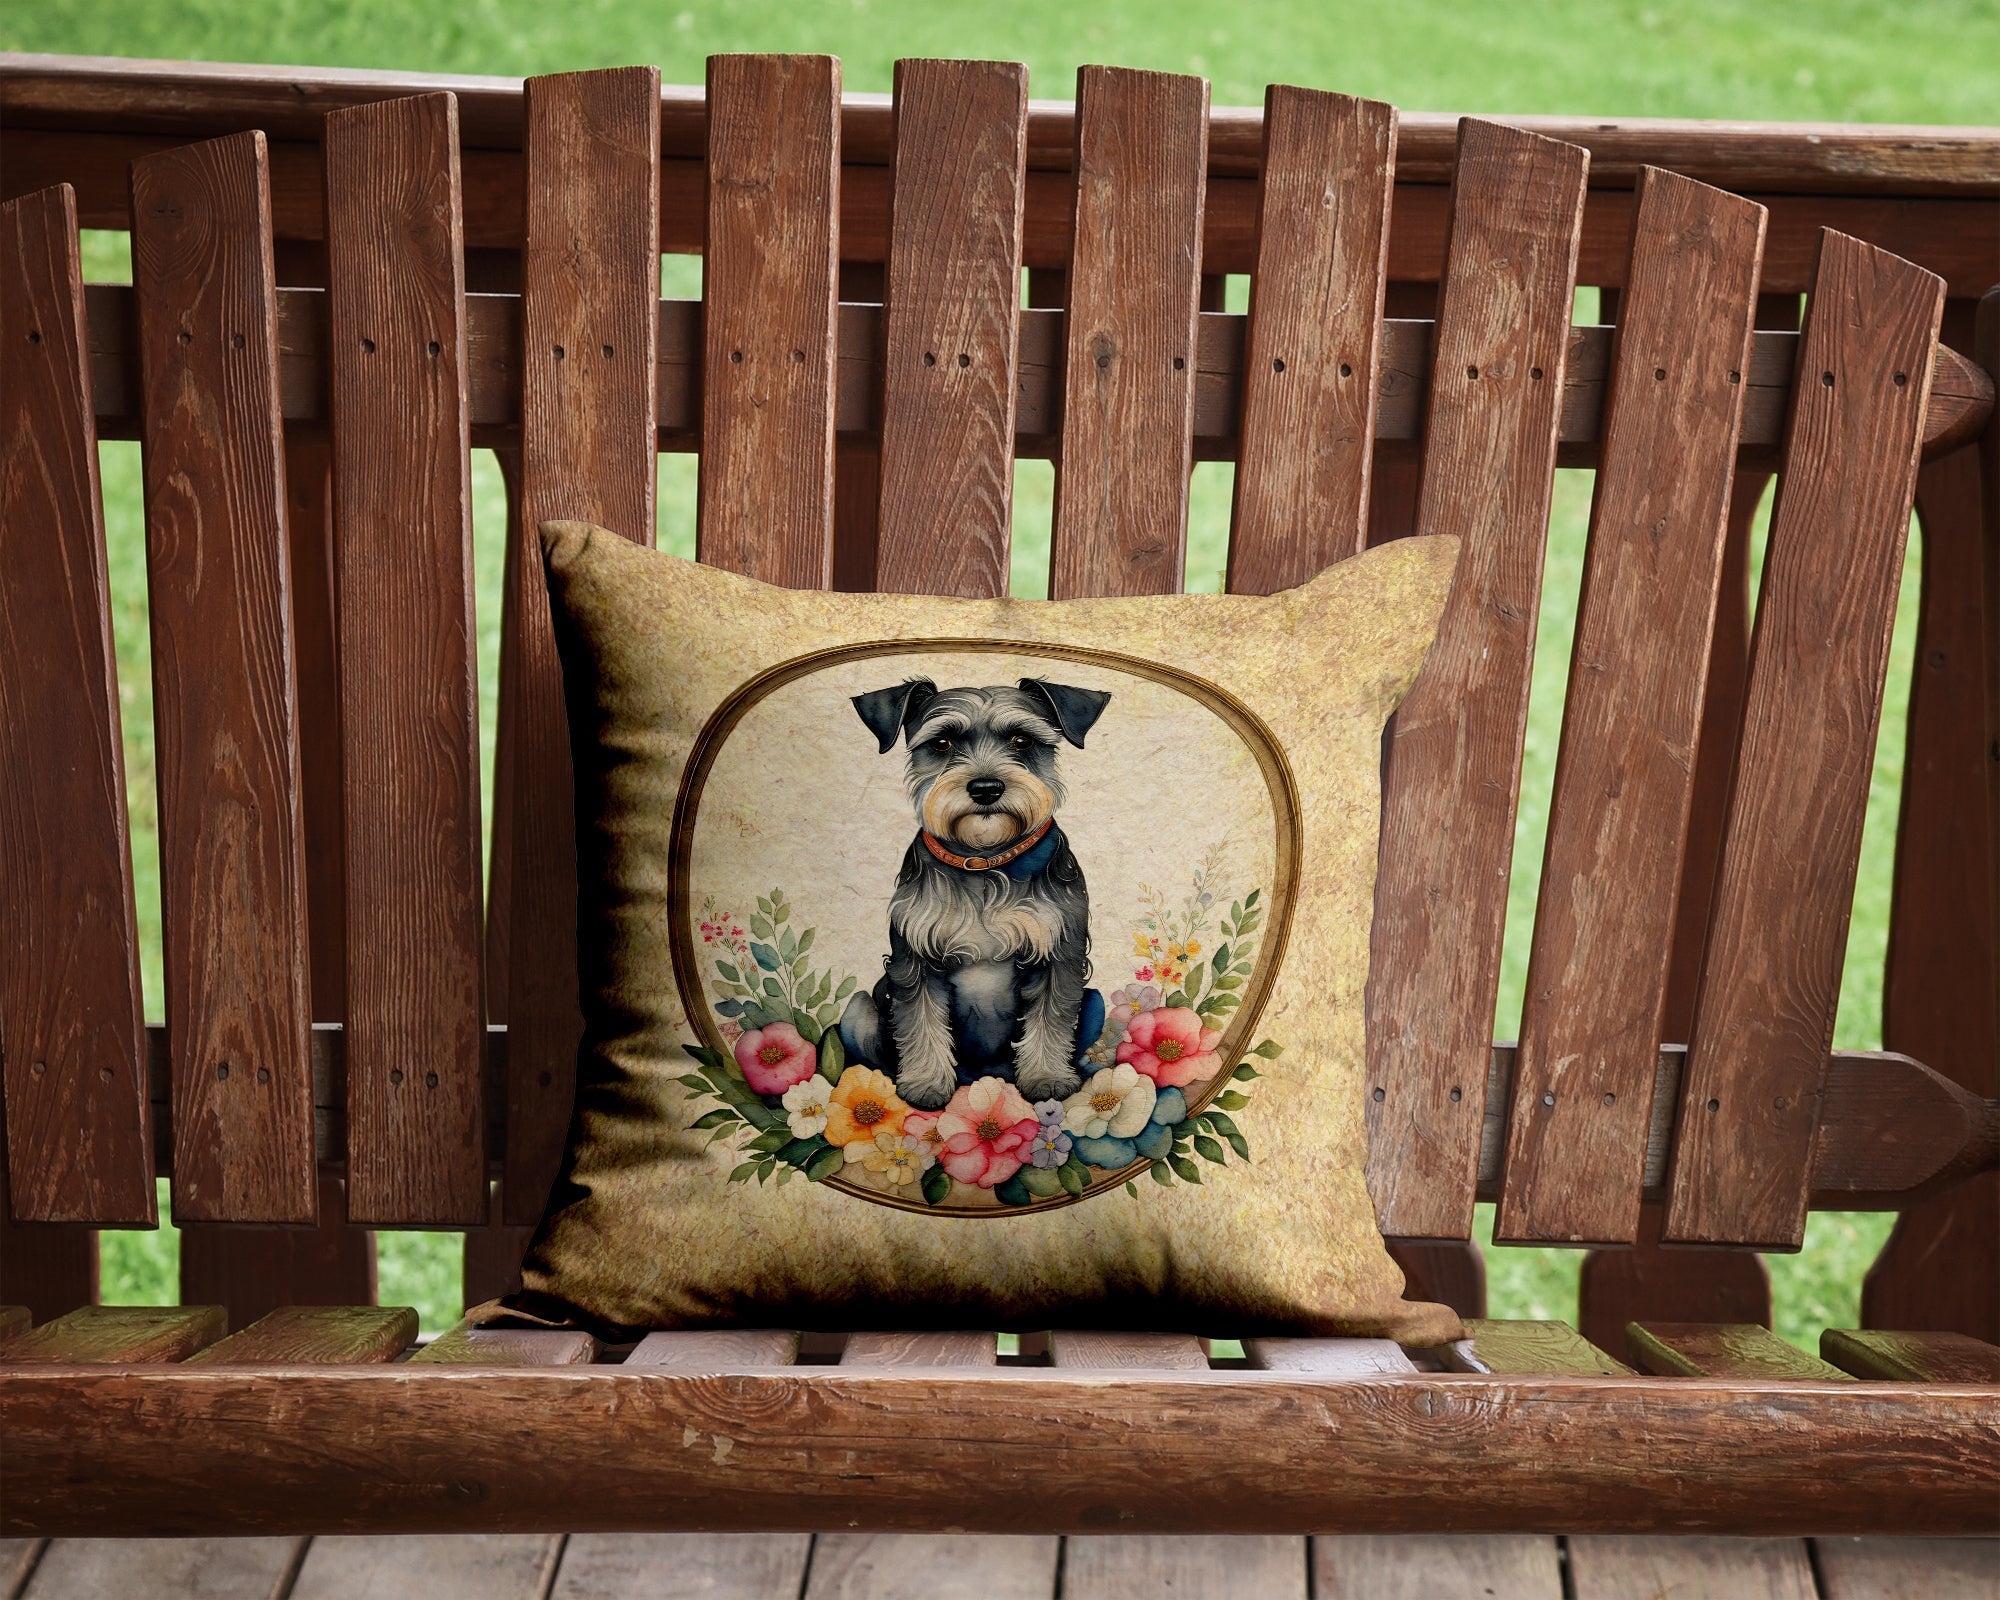 Schnauzer and Flowers Fabric Decorative Pillow